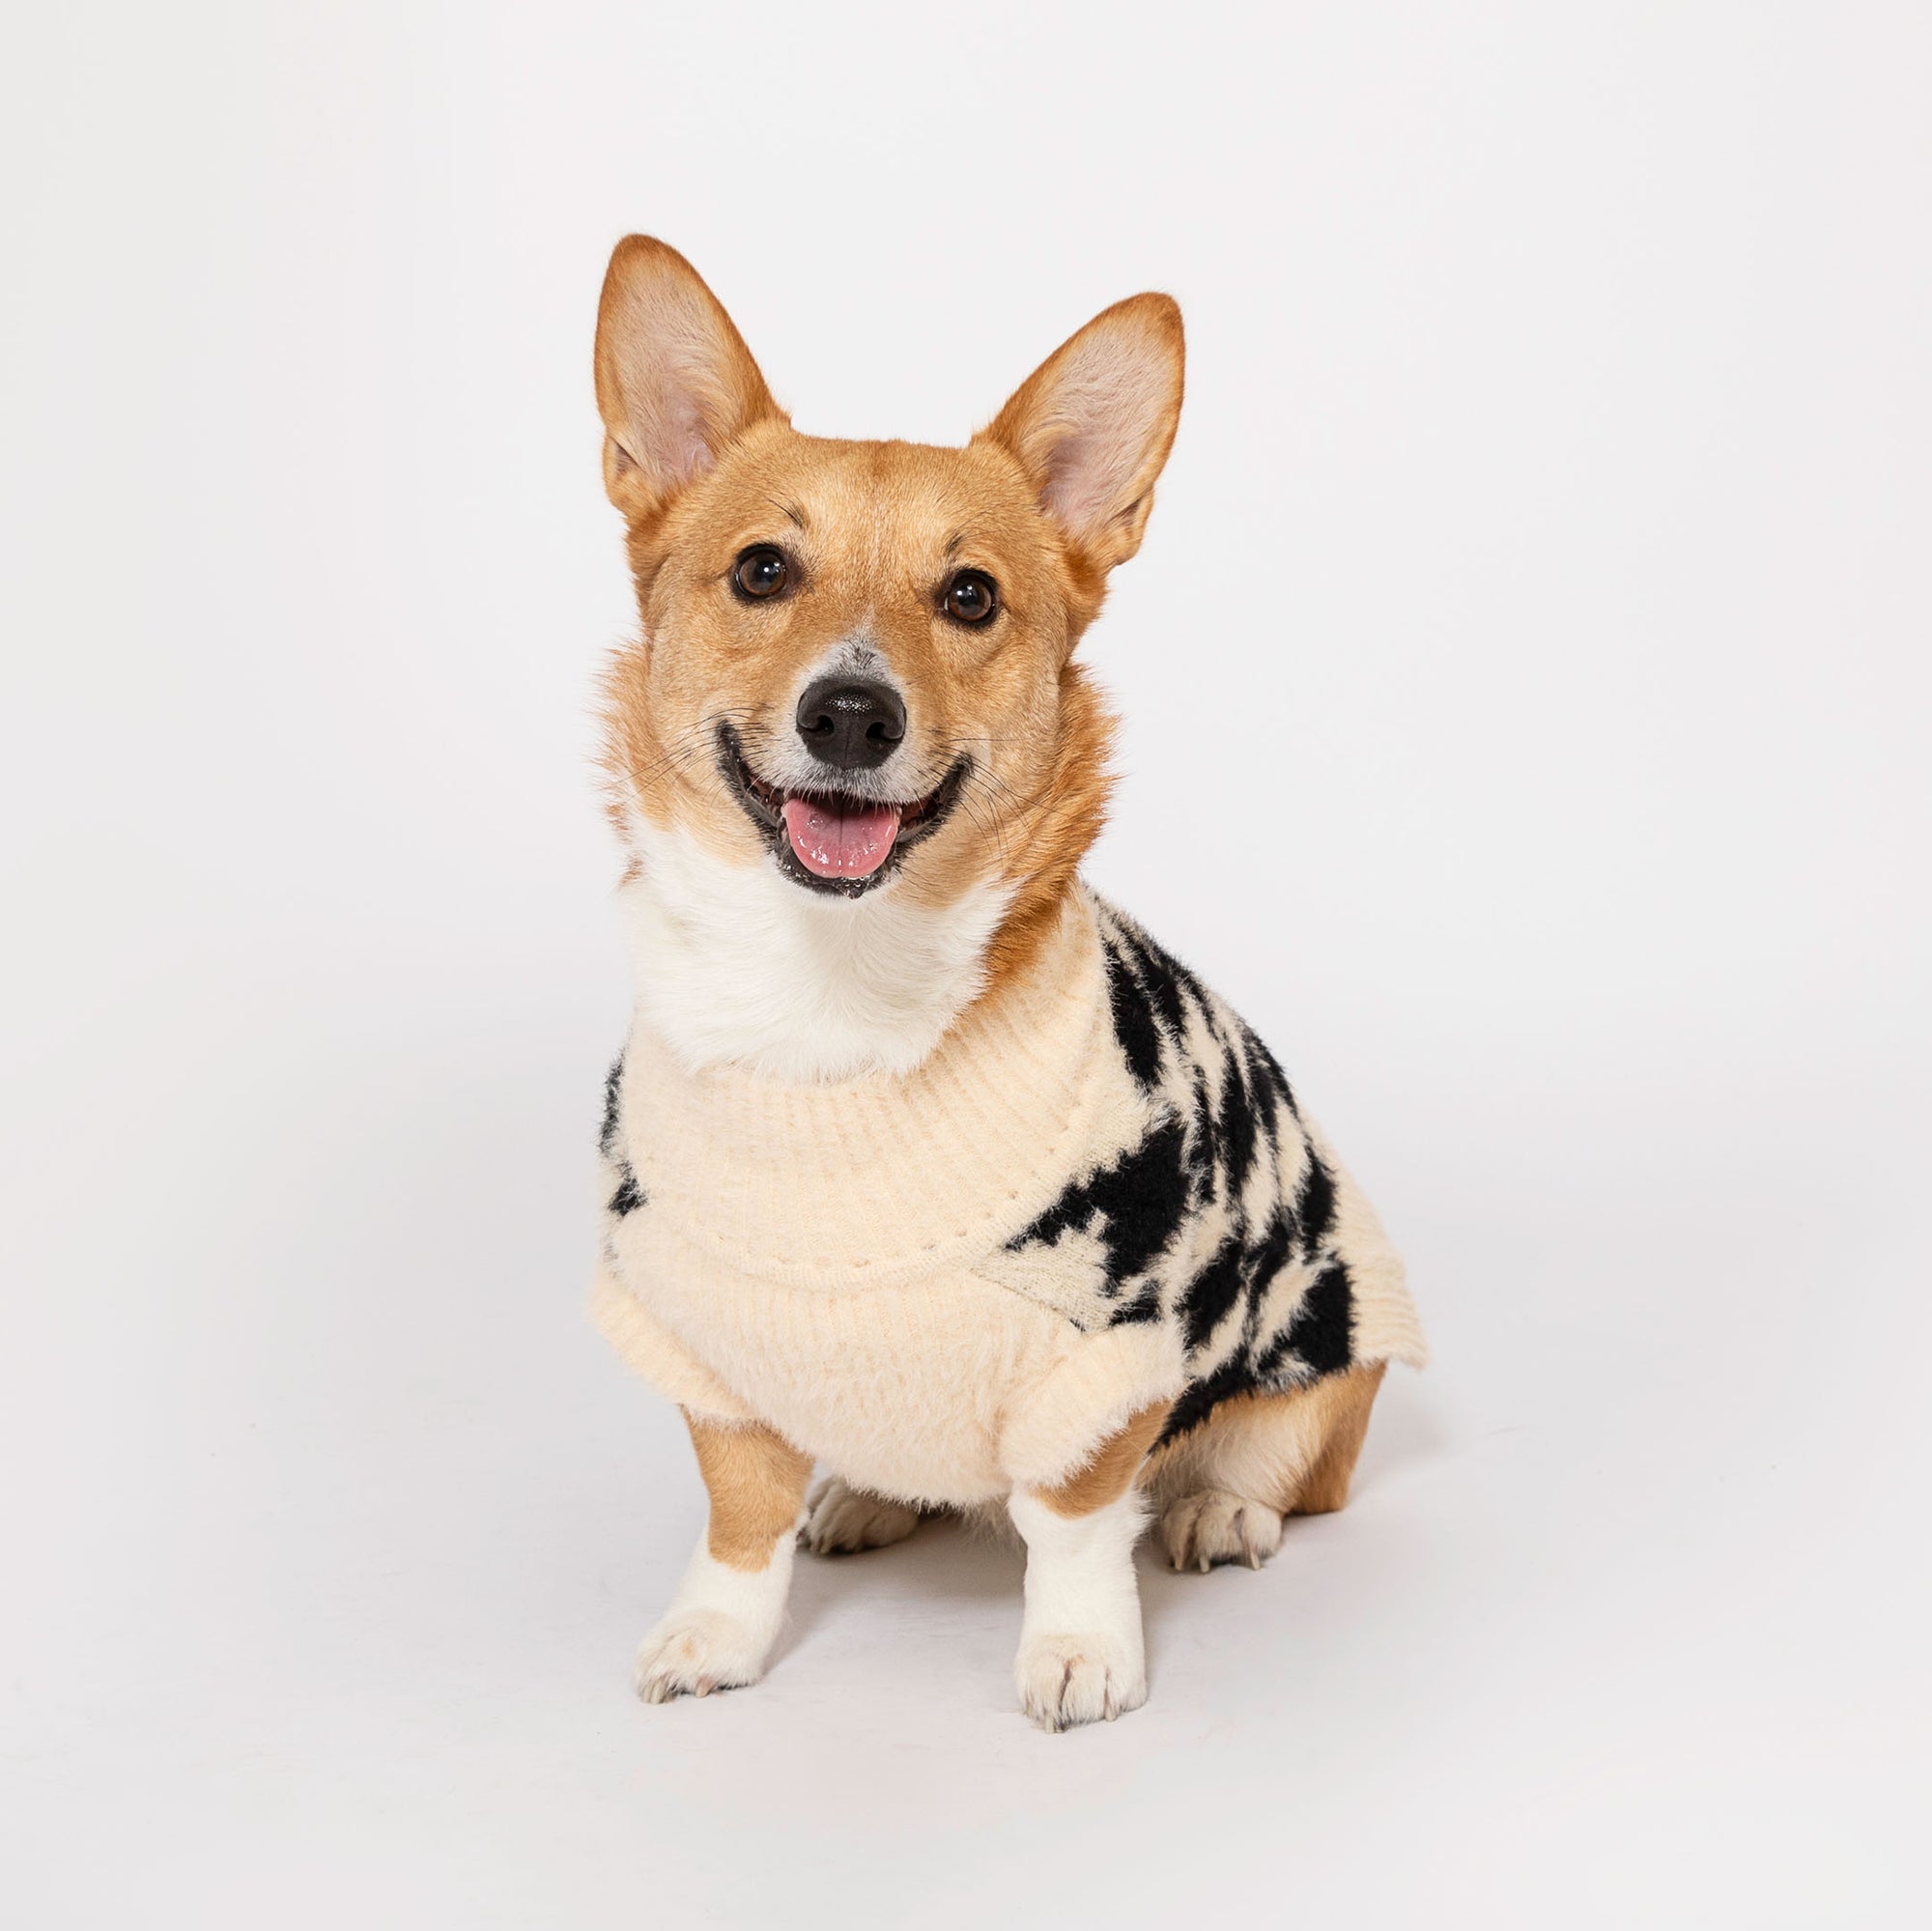 Joyful Corgi dog smiling and seated, wearing a cozy beige sweater with a black houndstooth pattern, posing against a white studio background.